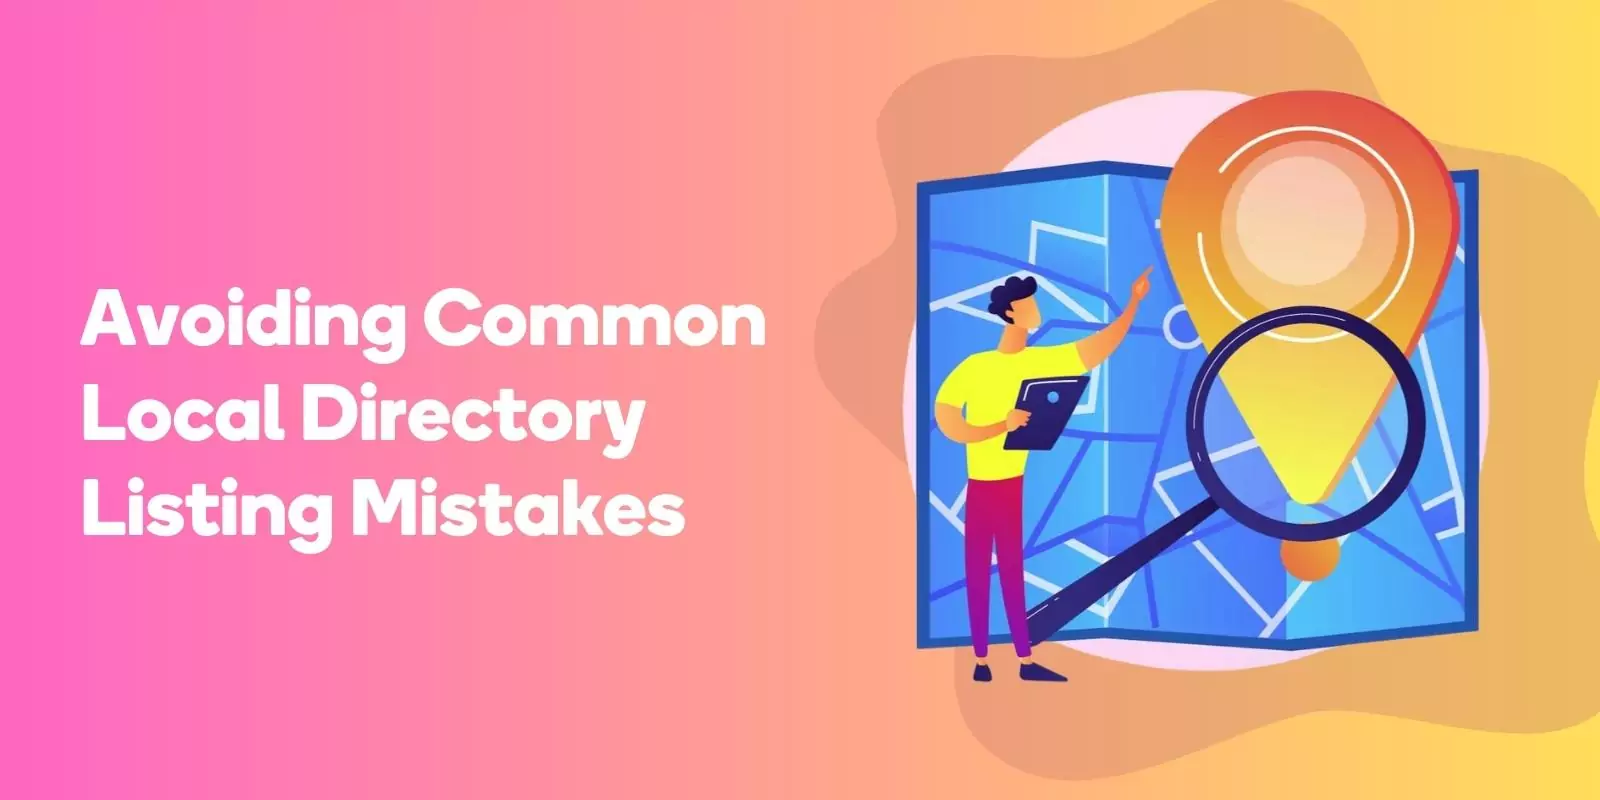 Avoiding Common Local Directory Listing Mistakes